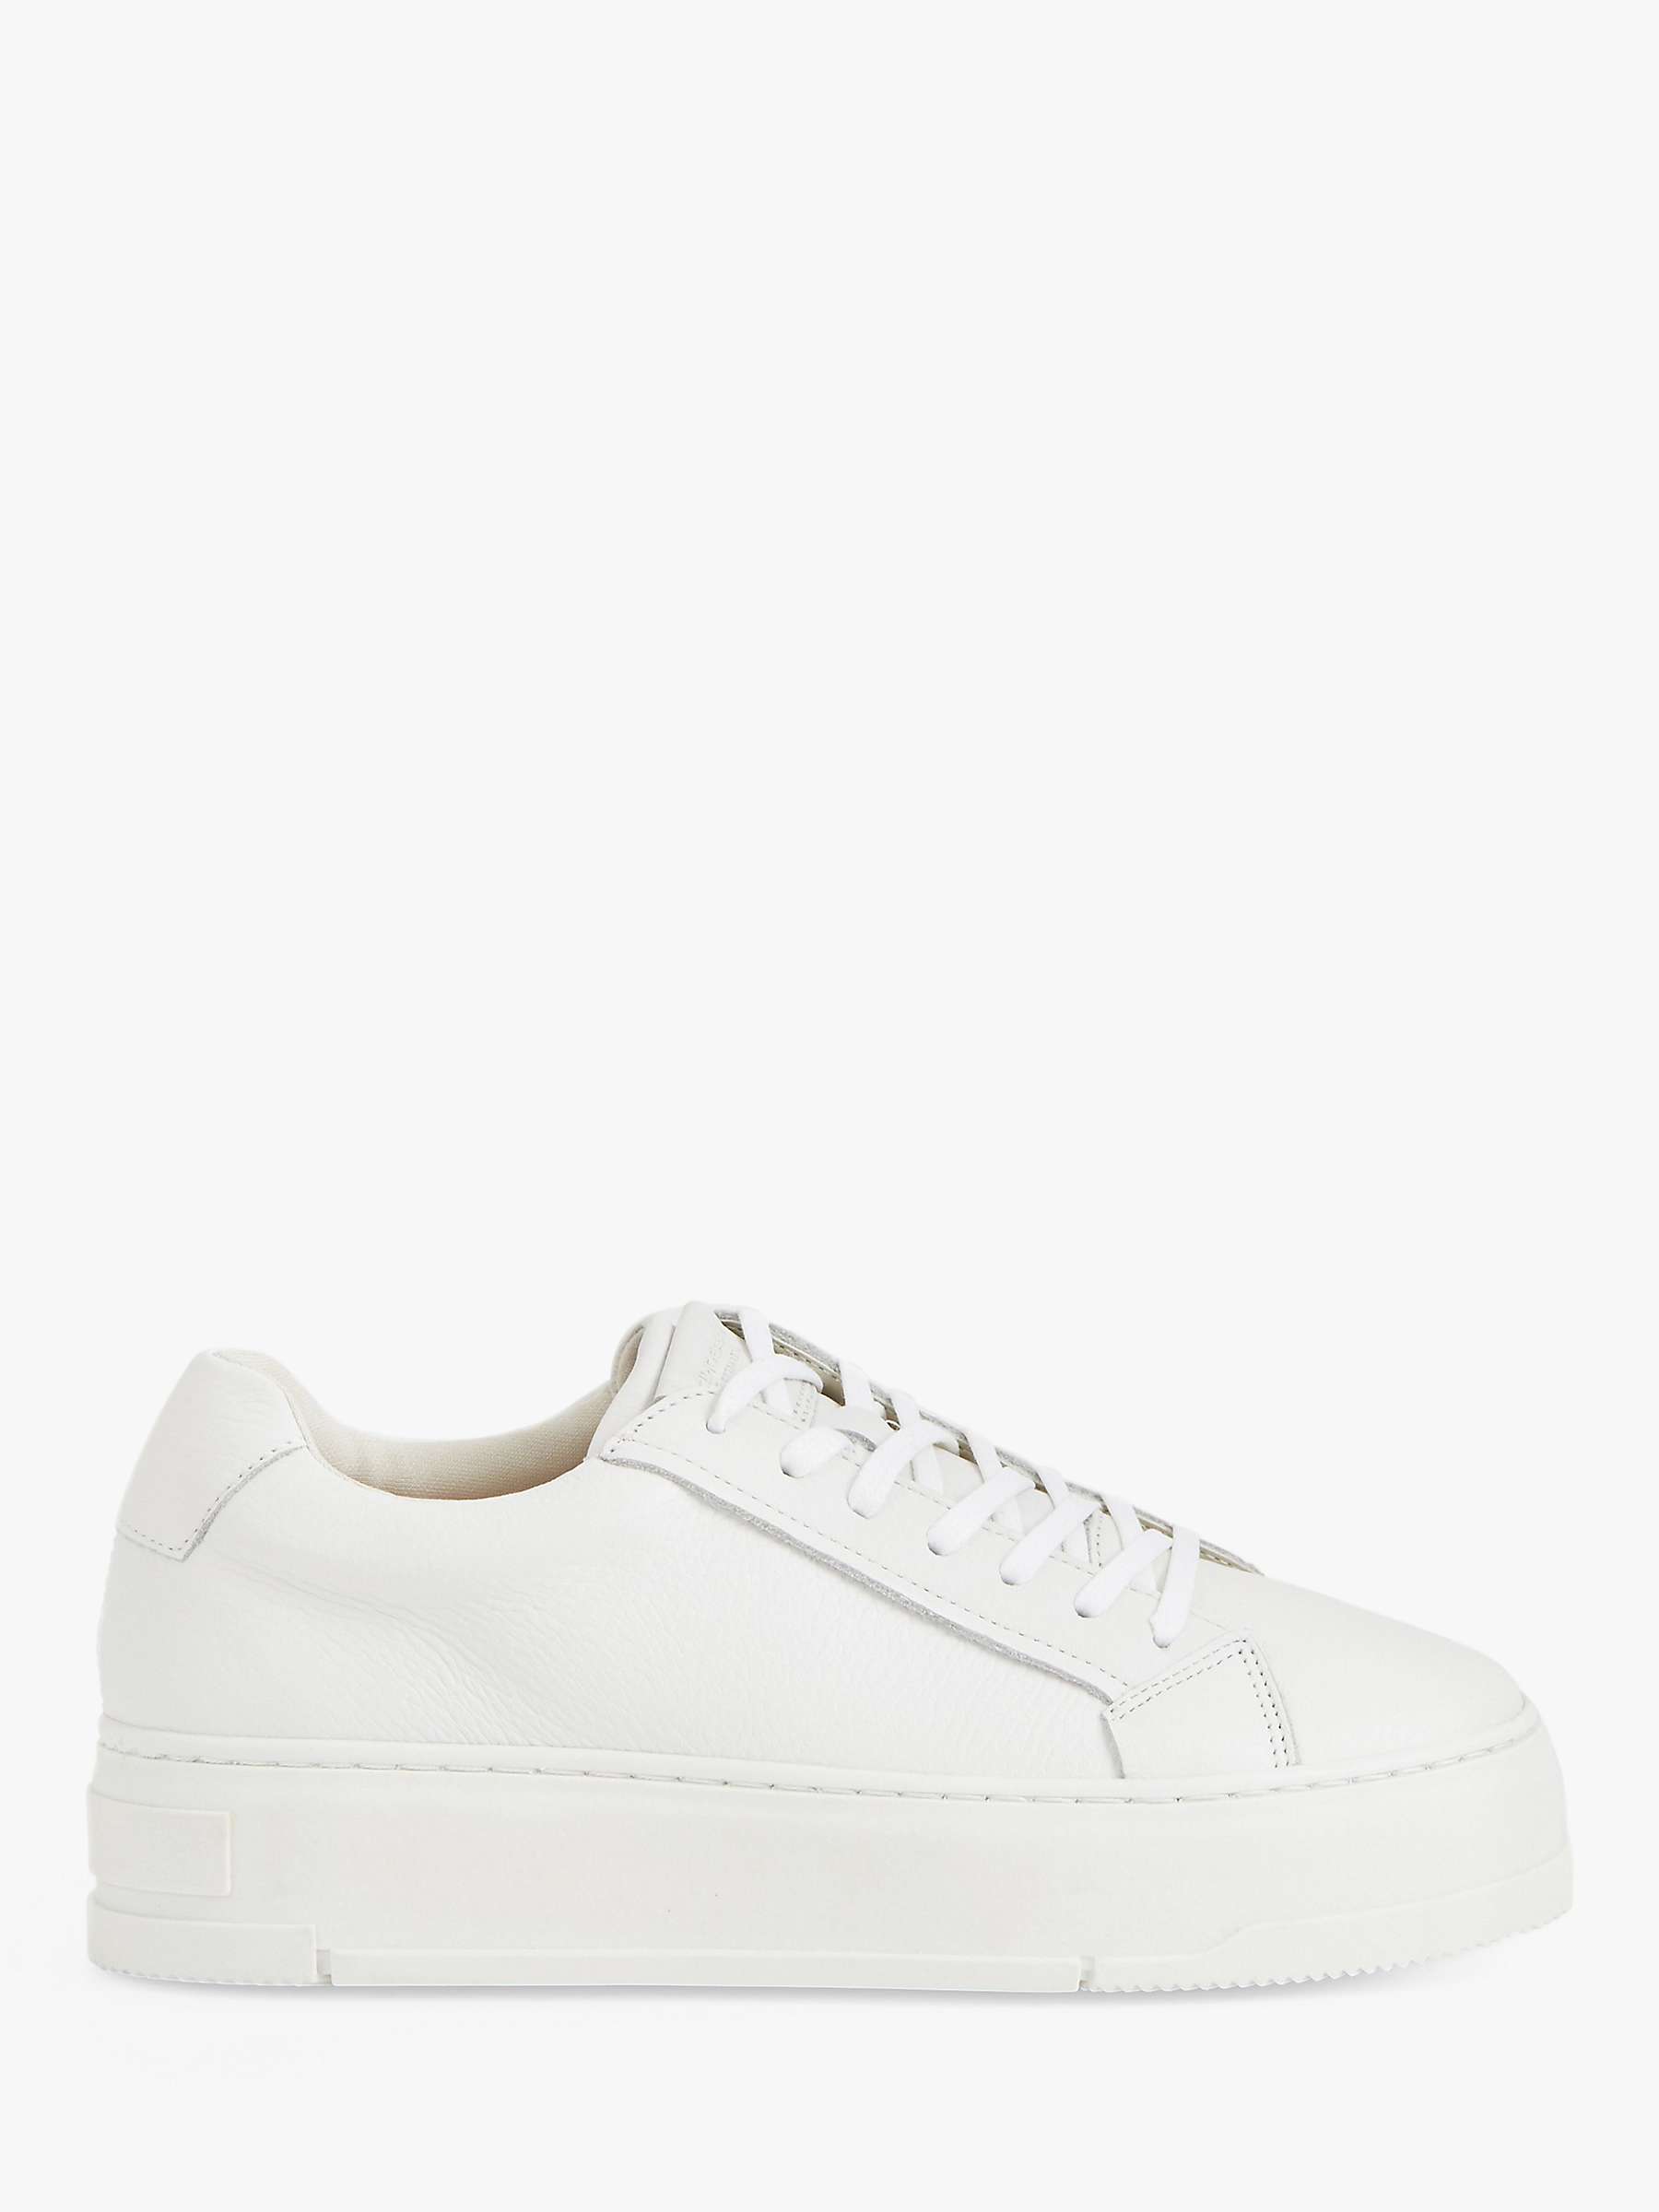 Buy Vagabond Shoemakers Judy Leather Trainers, White Online at johnlewis.com